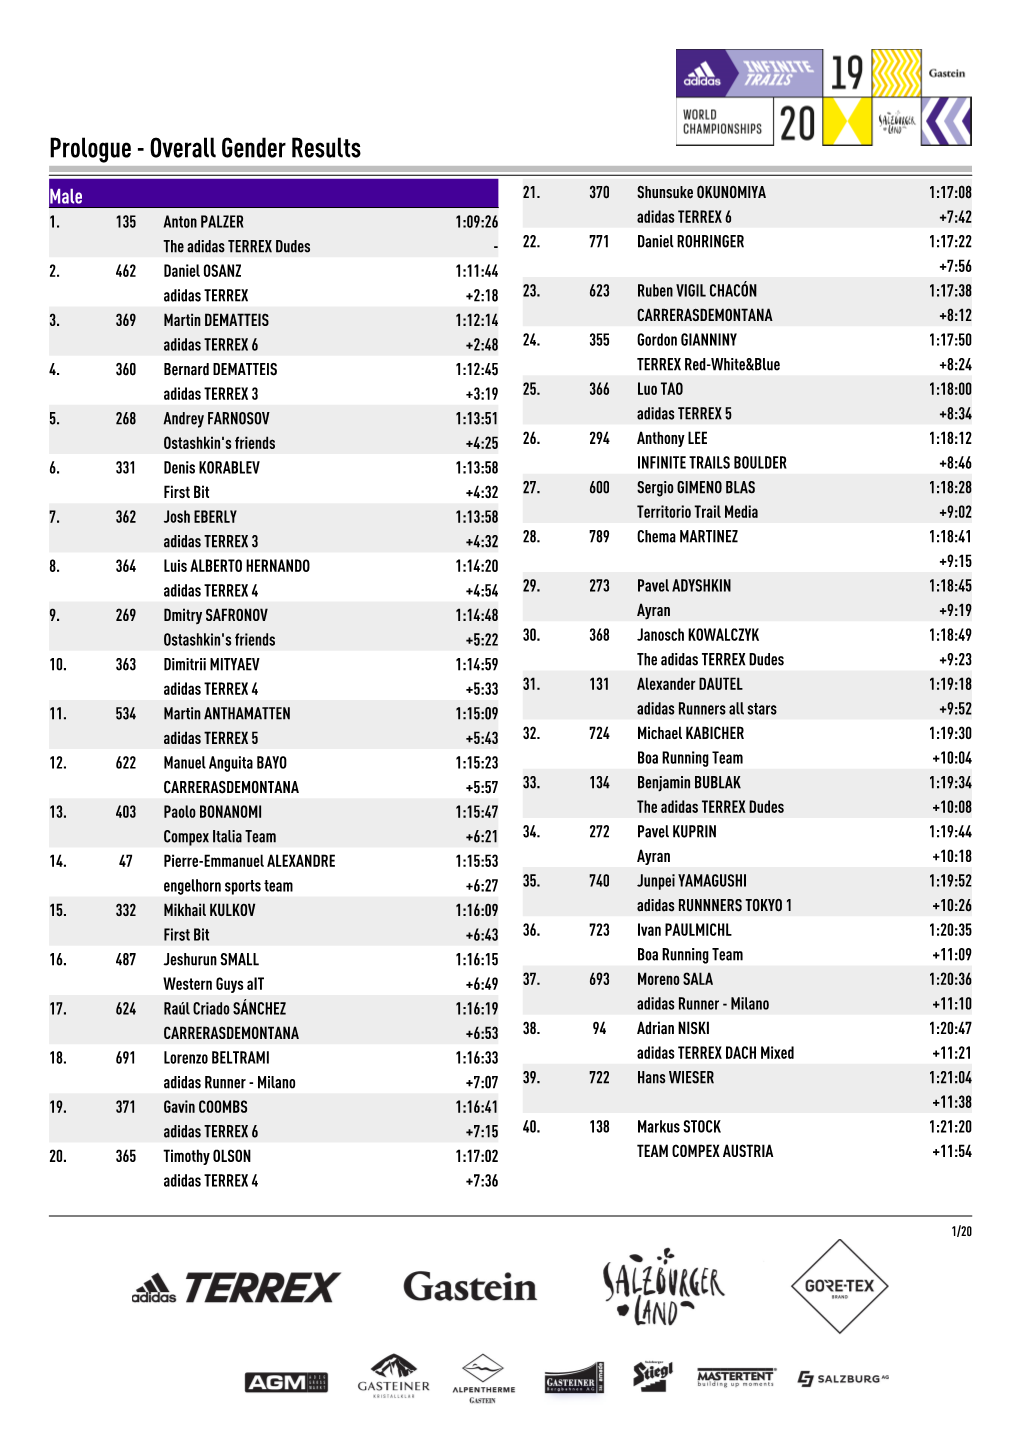 Prologue - Overall Gender Results